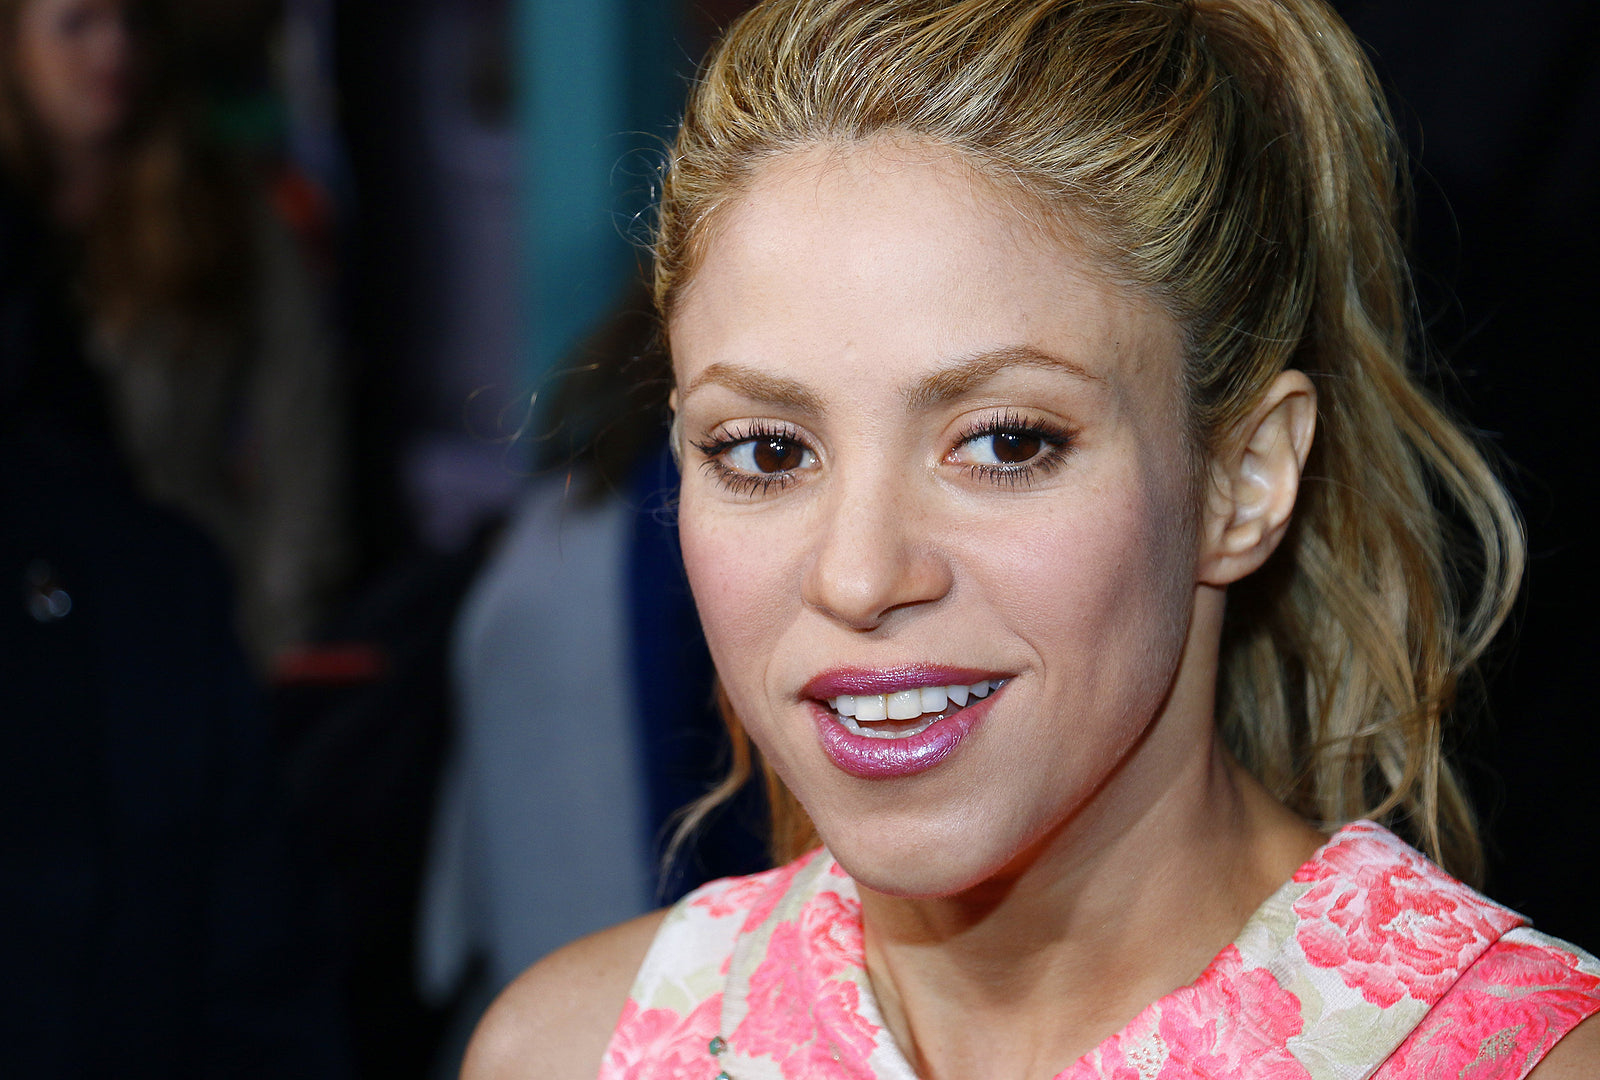 [Spain] Prosecutors recommend second Shakira tax investigation be thrown out